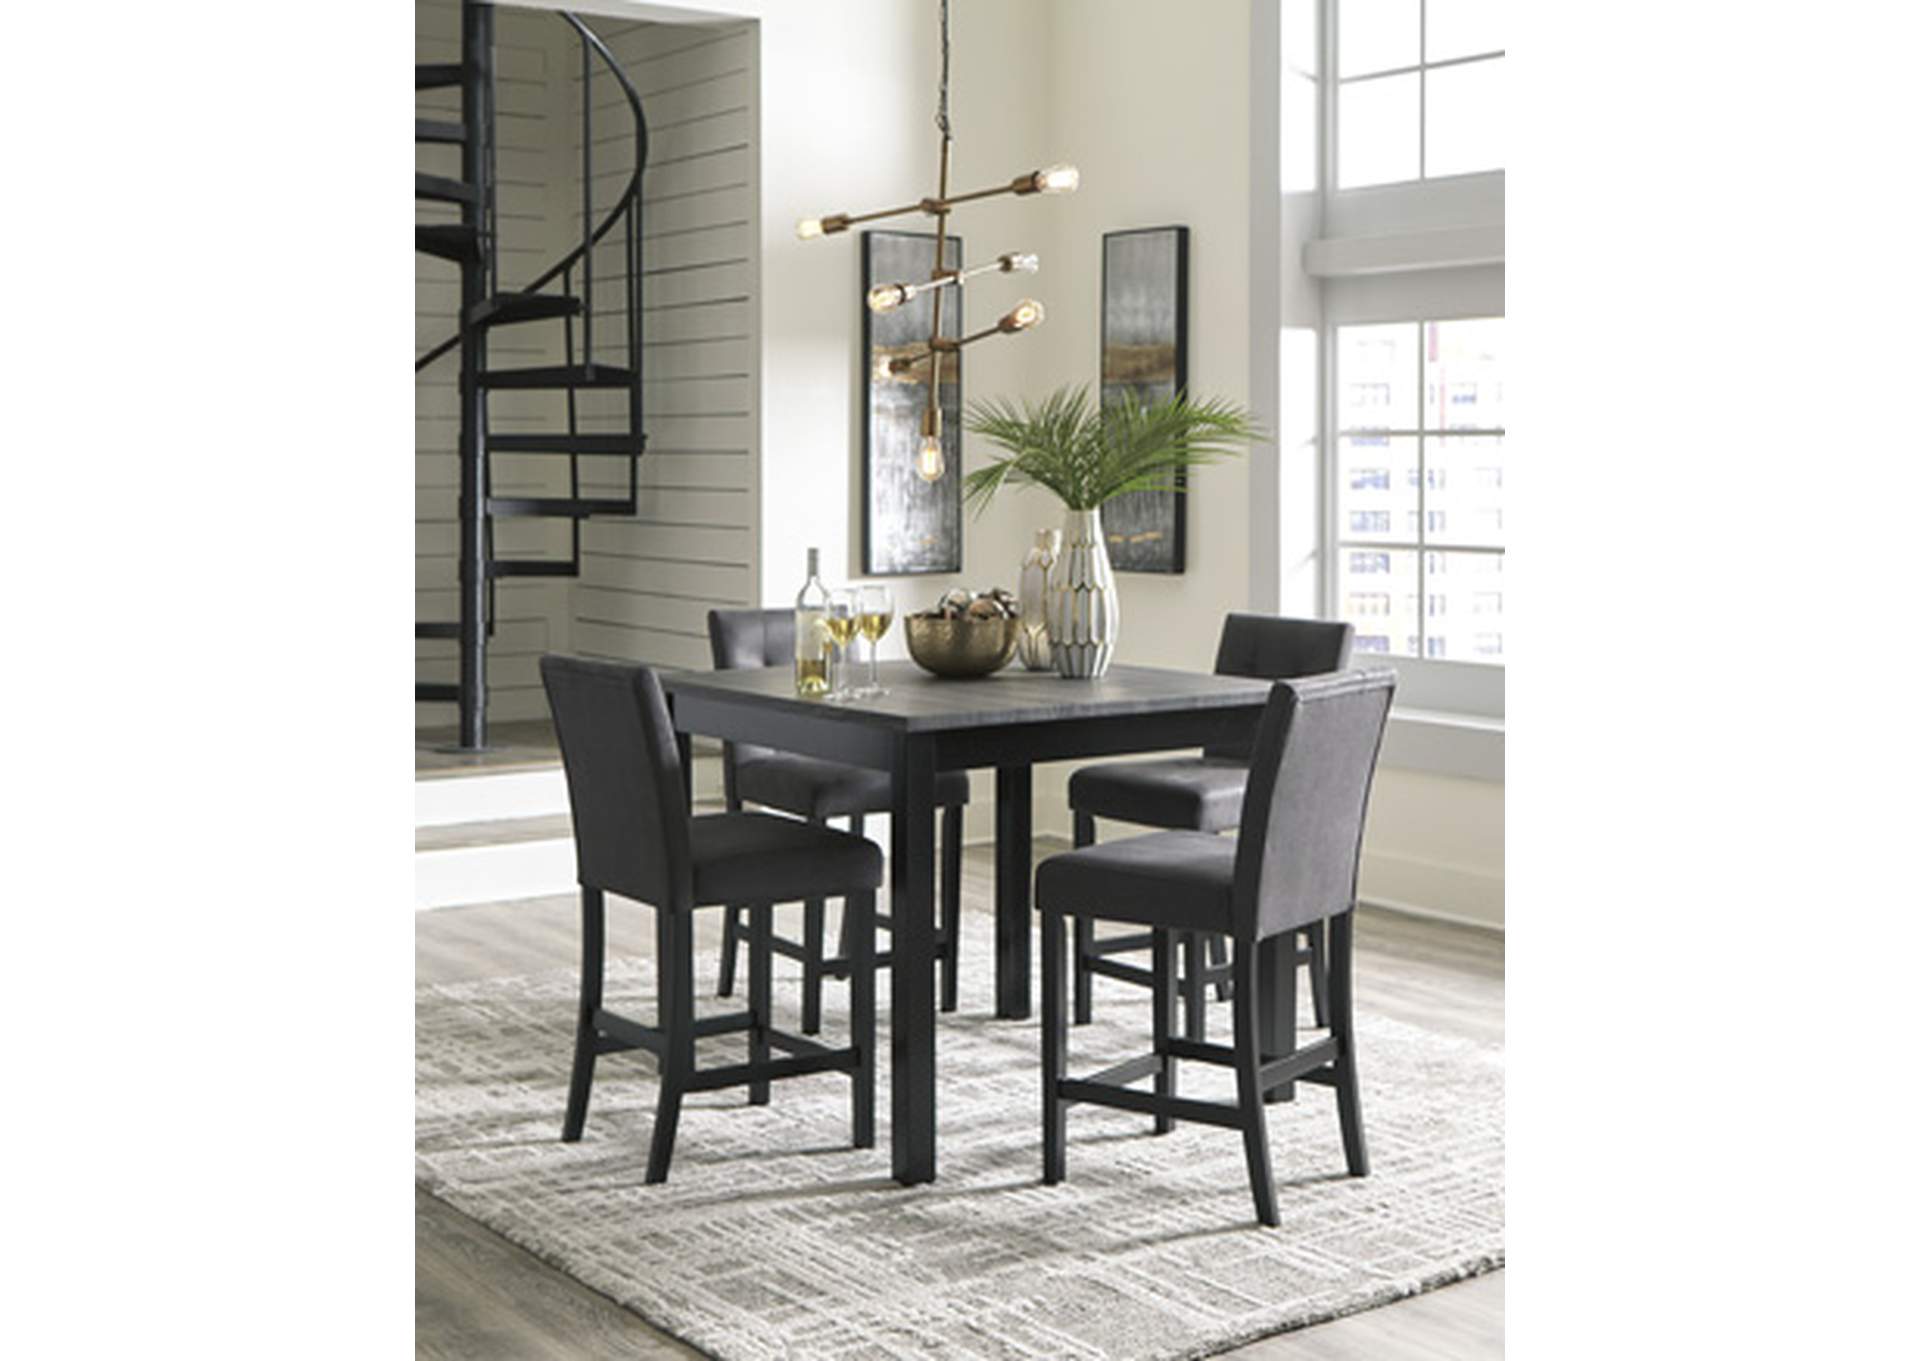 Garvine Counter Height Dining Table and Bar Stools (Set of 5),Signature Design By Ashley